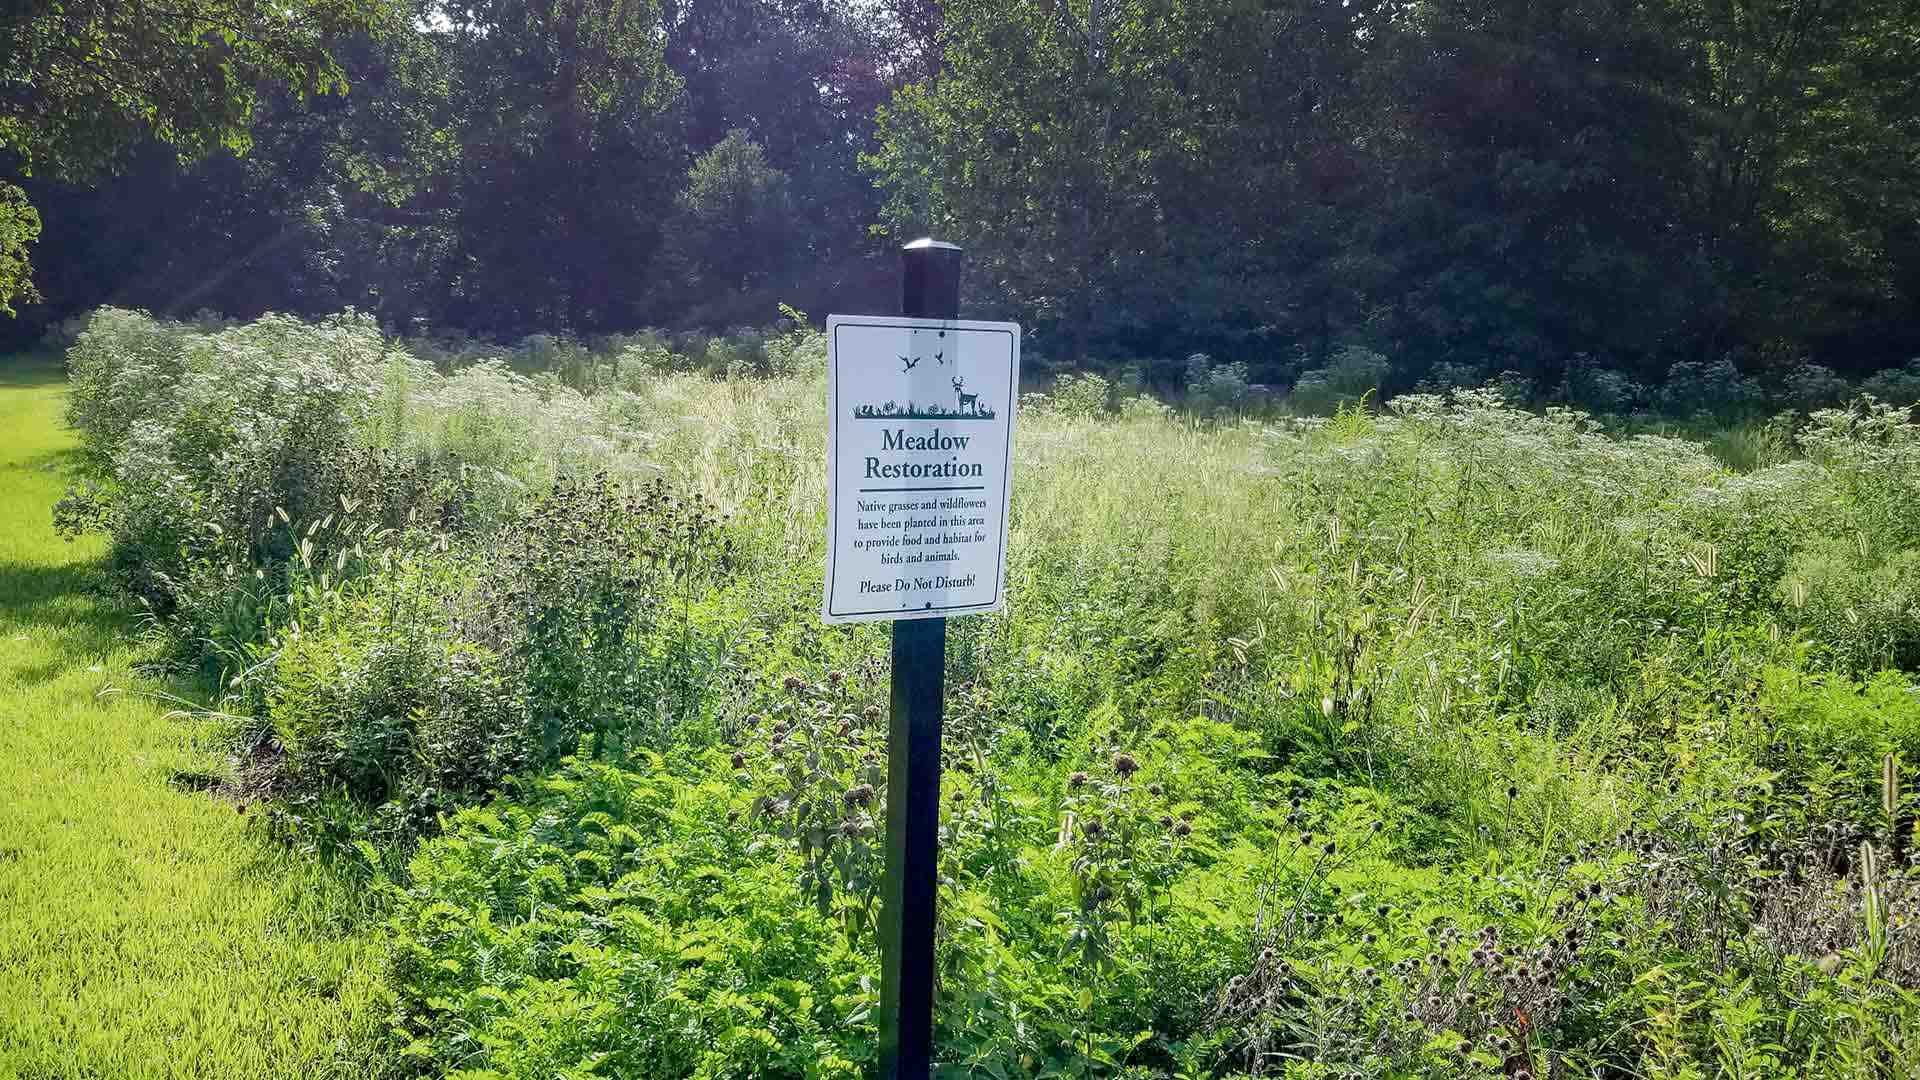 The University Park Pollinator Meadow on Adelphi Road is one of over 30 pollinator refuges stretching from Greenbelt to the D.C. line,